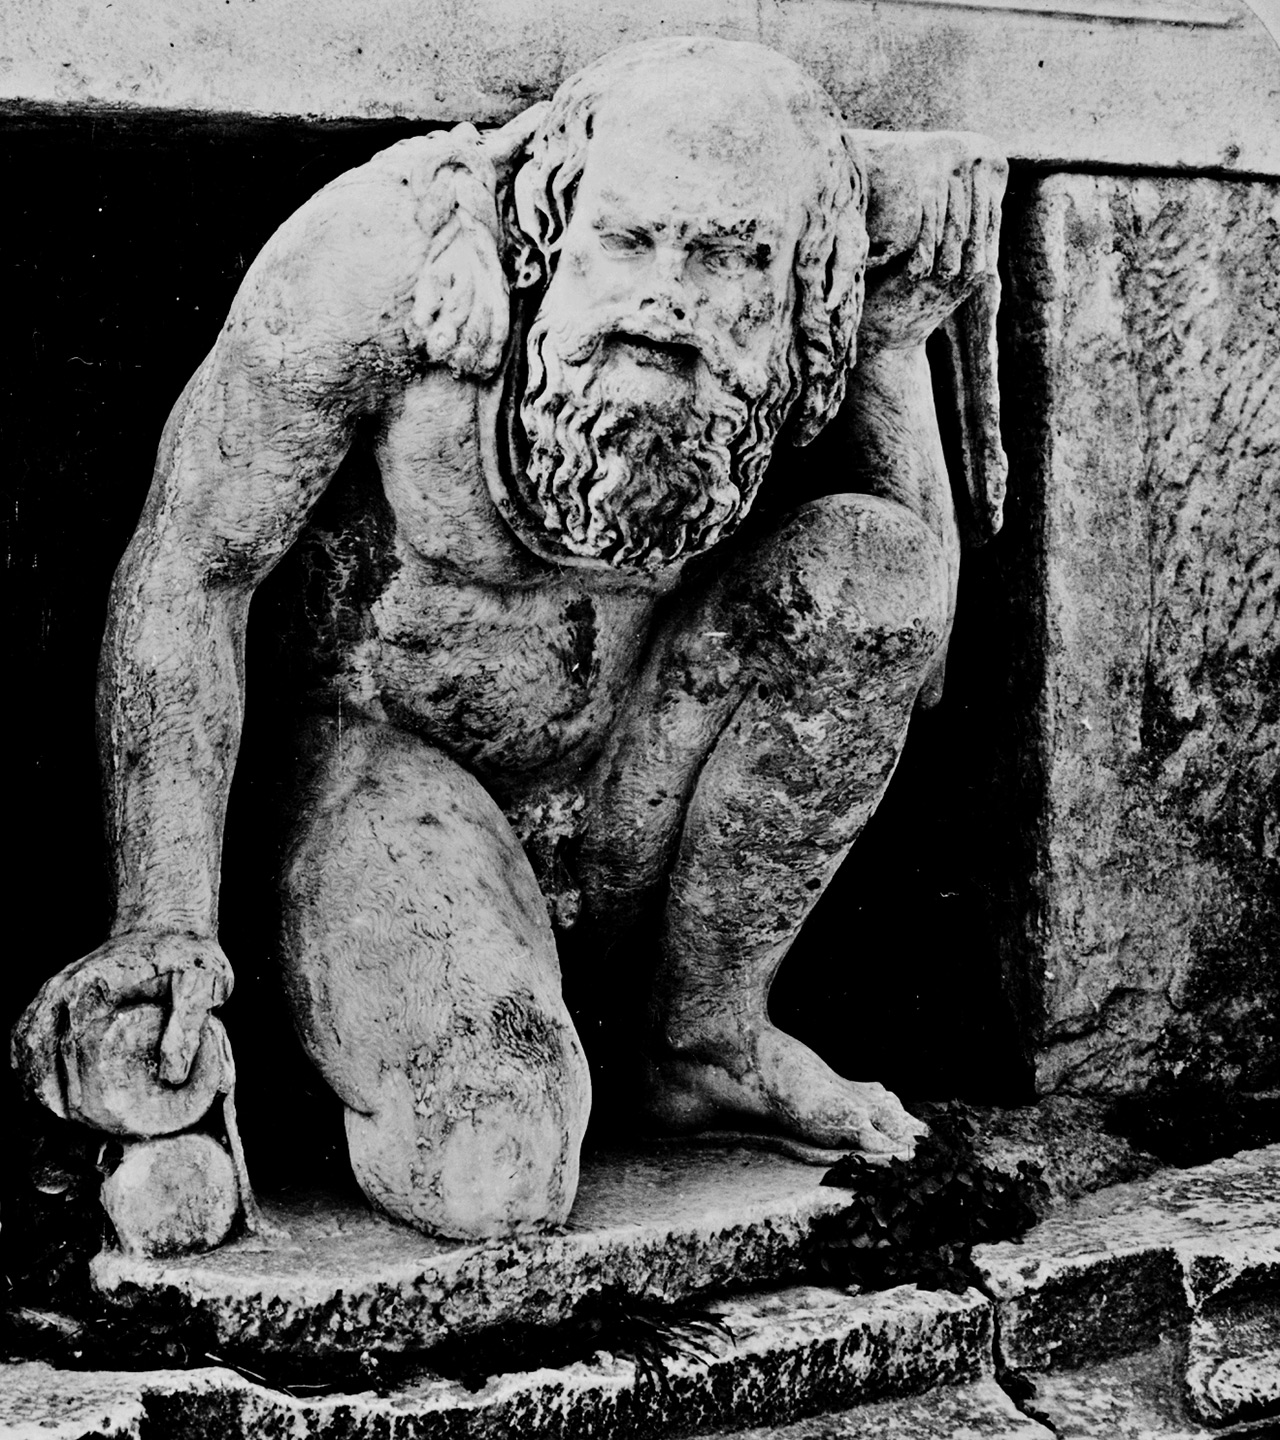 The Crouching Silenus, Stage of Theatre of Dionysus, Athens, Greece